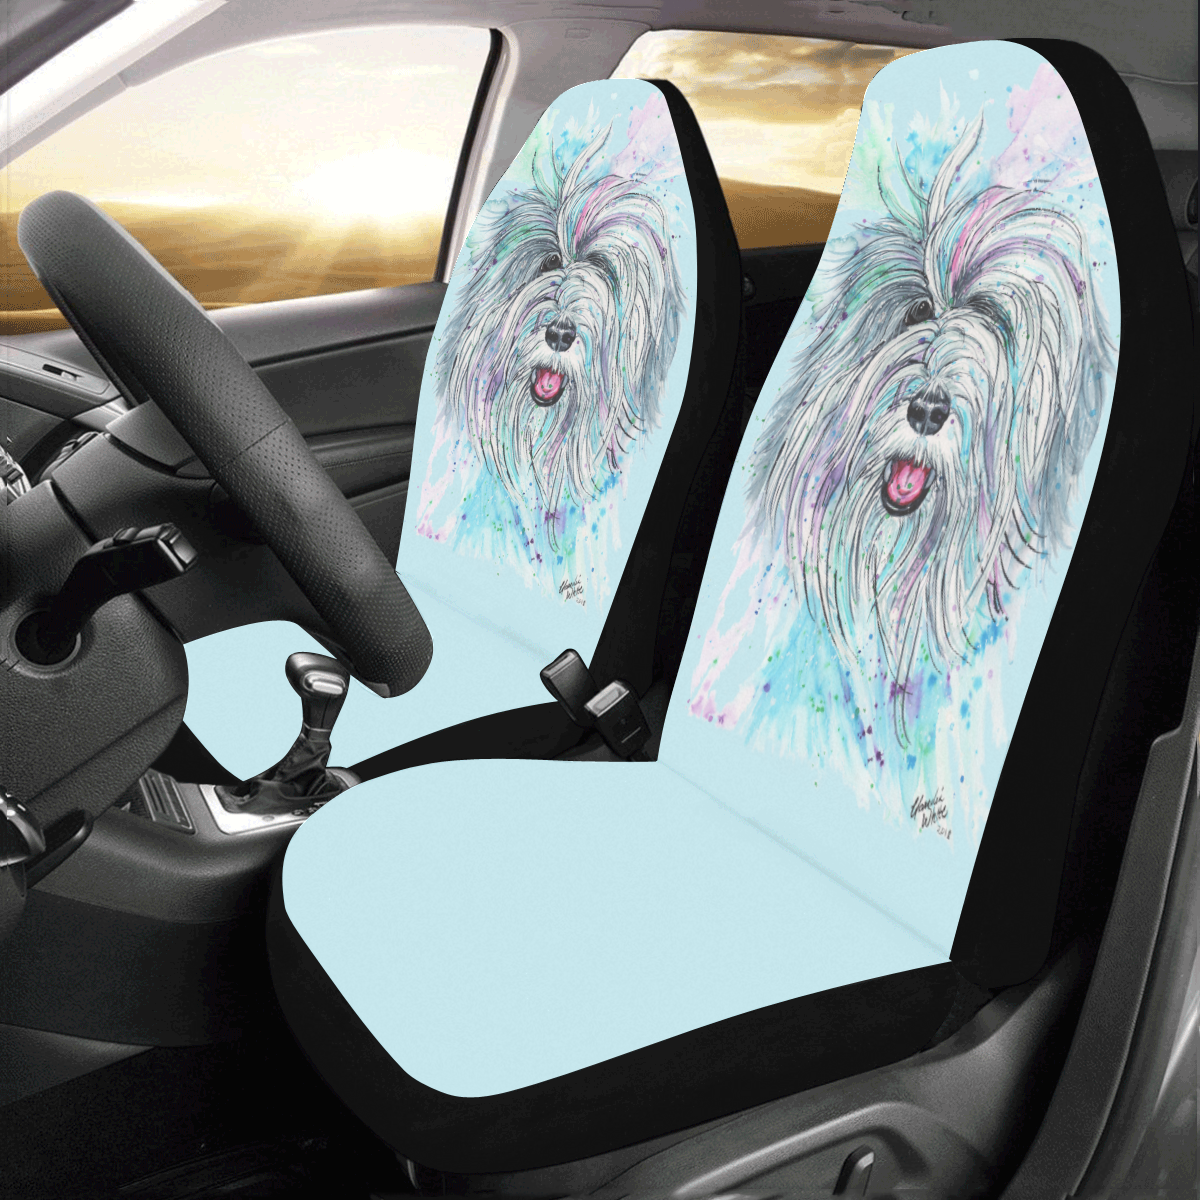 Breezy Car Seat Covers (Set of 2)